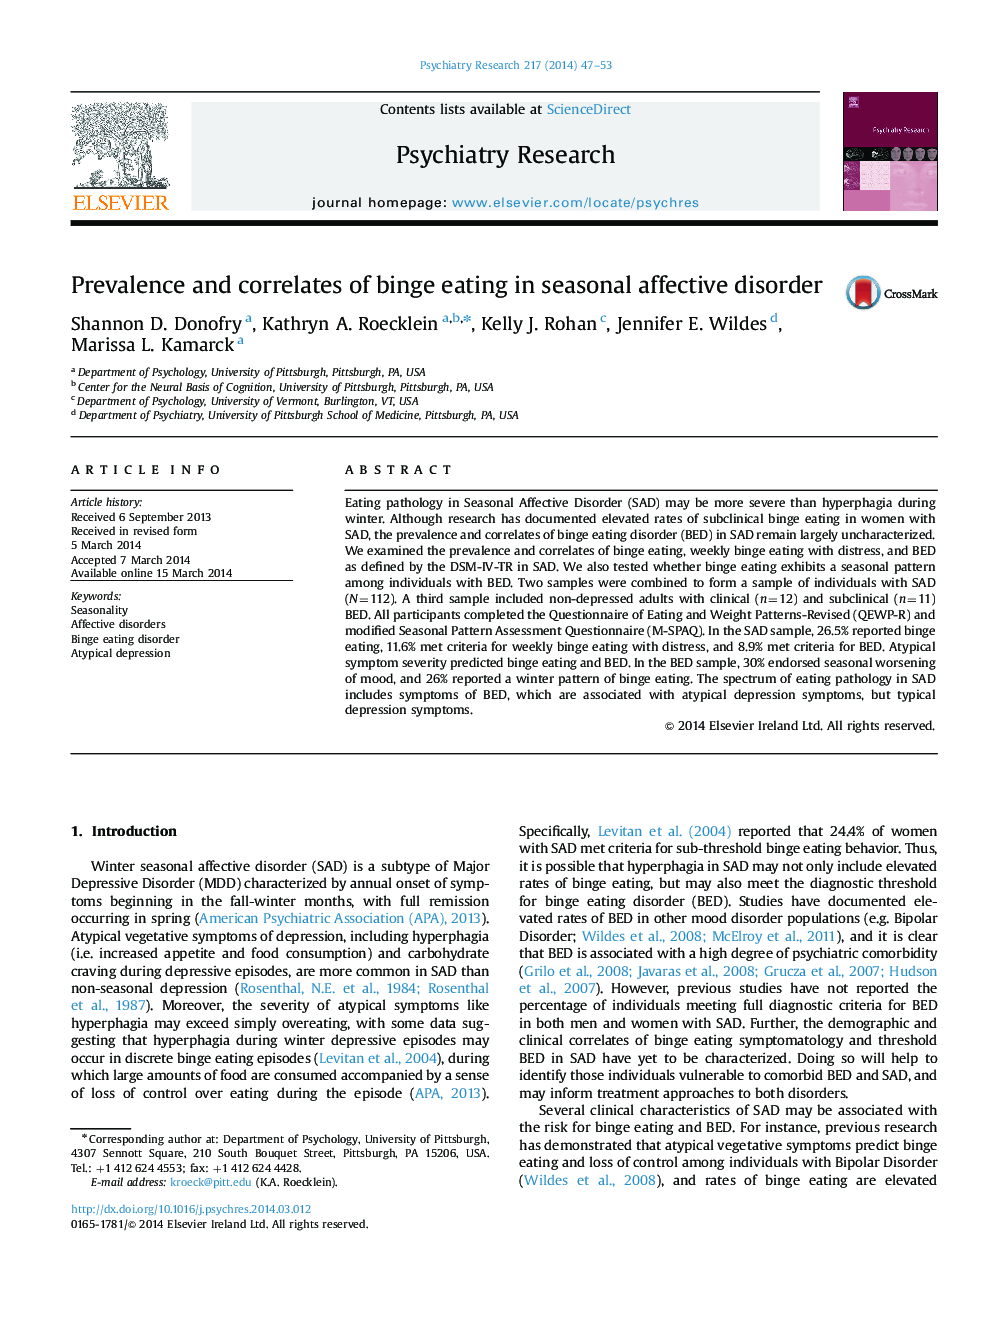 Prevalence and correlates of binge eating in seasonal affective disorder